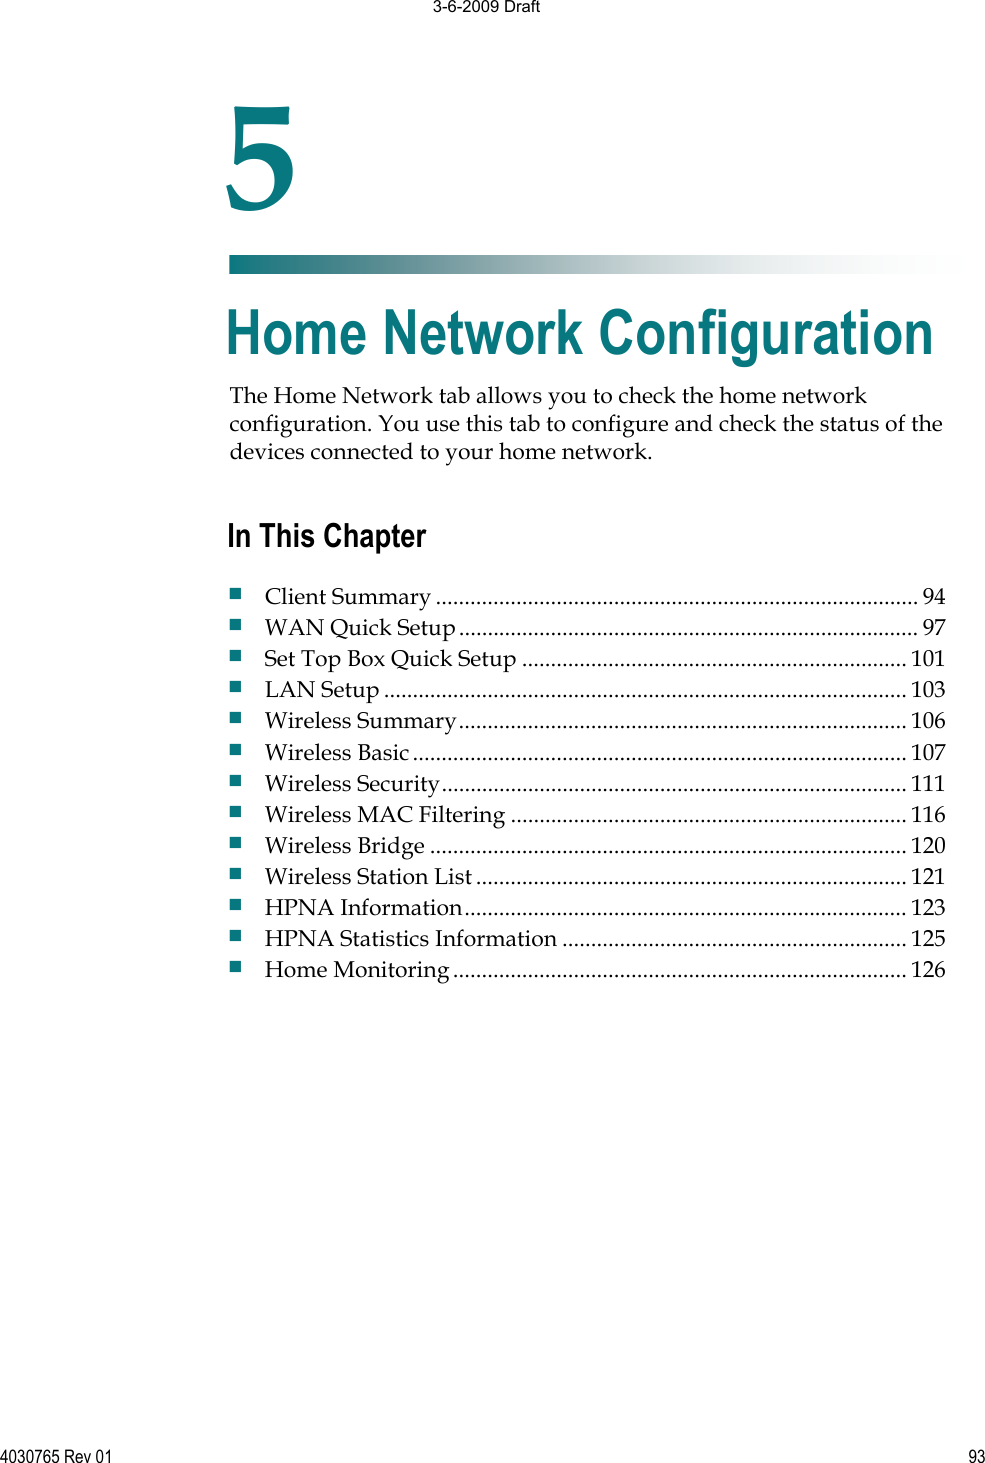 4030765 Rev 01 93The Home Network tab allows you to check the home network configuration. You use this tab to configure and check the status of the devices connected to your home network. 5Chapter 5Home Network Configuration In This Chapter Client Summary .................................................................................... 94 WAN Quick Setup................................................................................ 97 Set Top Box Quick Setup ................................................................... 101 LAN Setup ........................................................................................... 103 Wireless Summary.............................................................................. 106 Wireless Basic...................................................................................... 107 Wireless Security................................................................................. 111 Wireless MAC Filtering ..................................................................... 116 Wireless Bridge ................................................................................... 120 Wireless Station List ........................................................................... 121 HPNA Information............................................................................. 123 HPNA Statistics Information ............................................................ 125 Home Monitoring............................................................................... 126 3-6-2009 Draft